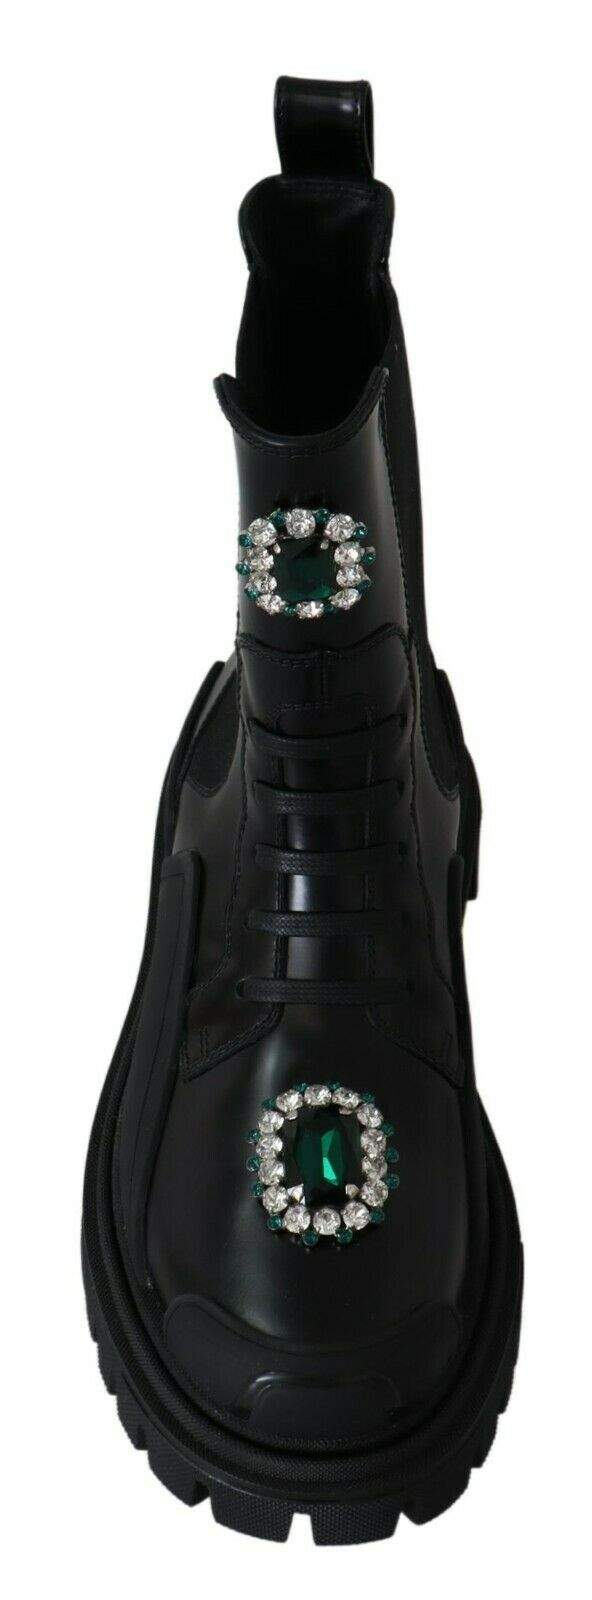 Dolce & Gabbana Black Leather Crystal Combat Boots Black, Boots - Women - Shoes, Dolce & Gabbana, EU35/US4.5, feed-1, Shoes - New Arrivals at SEYMAYKA